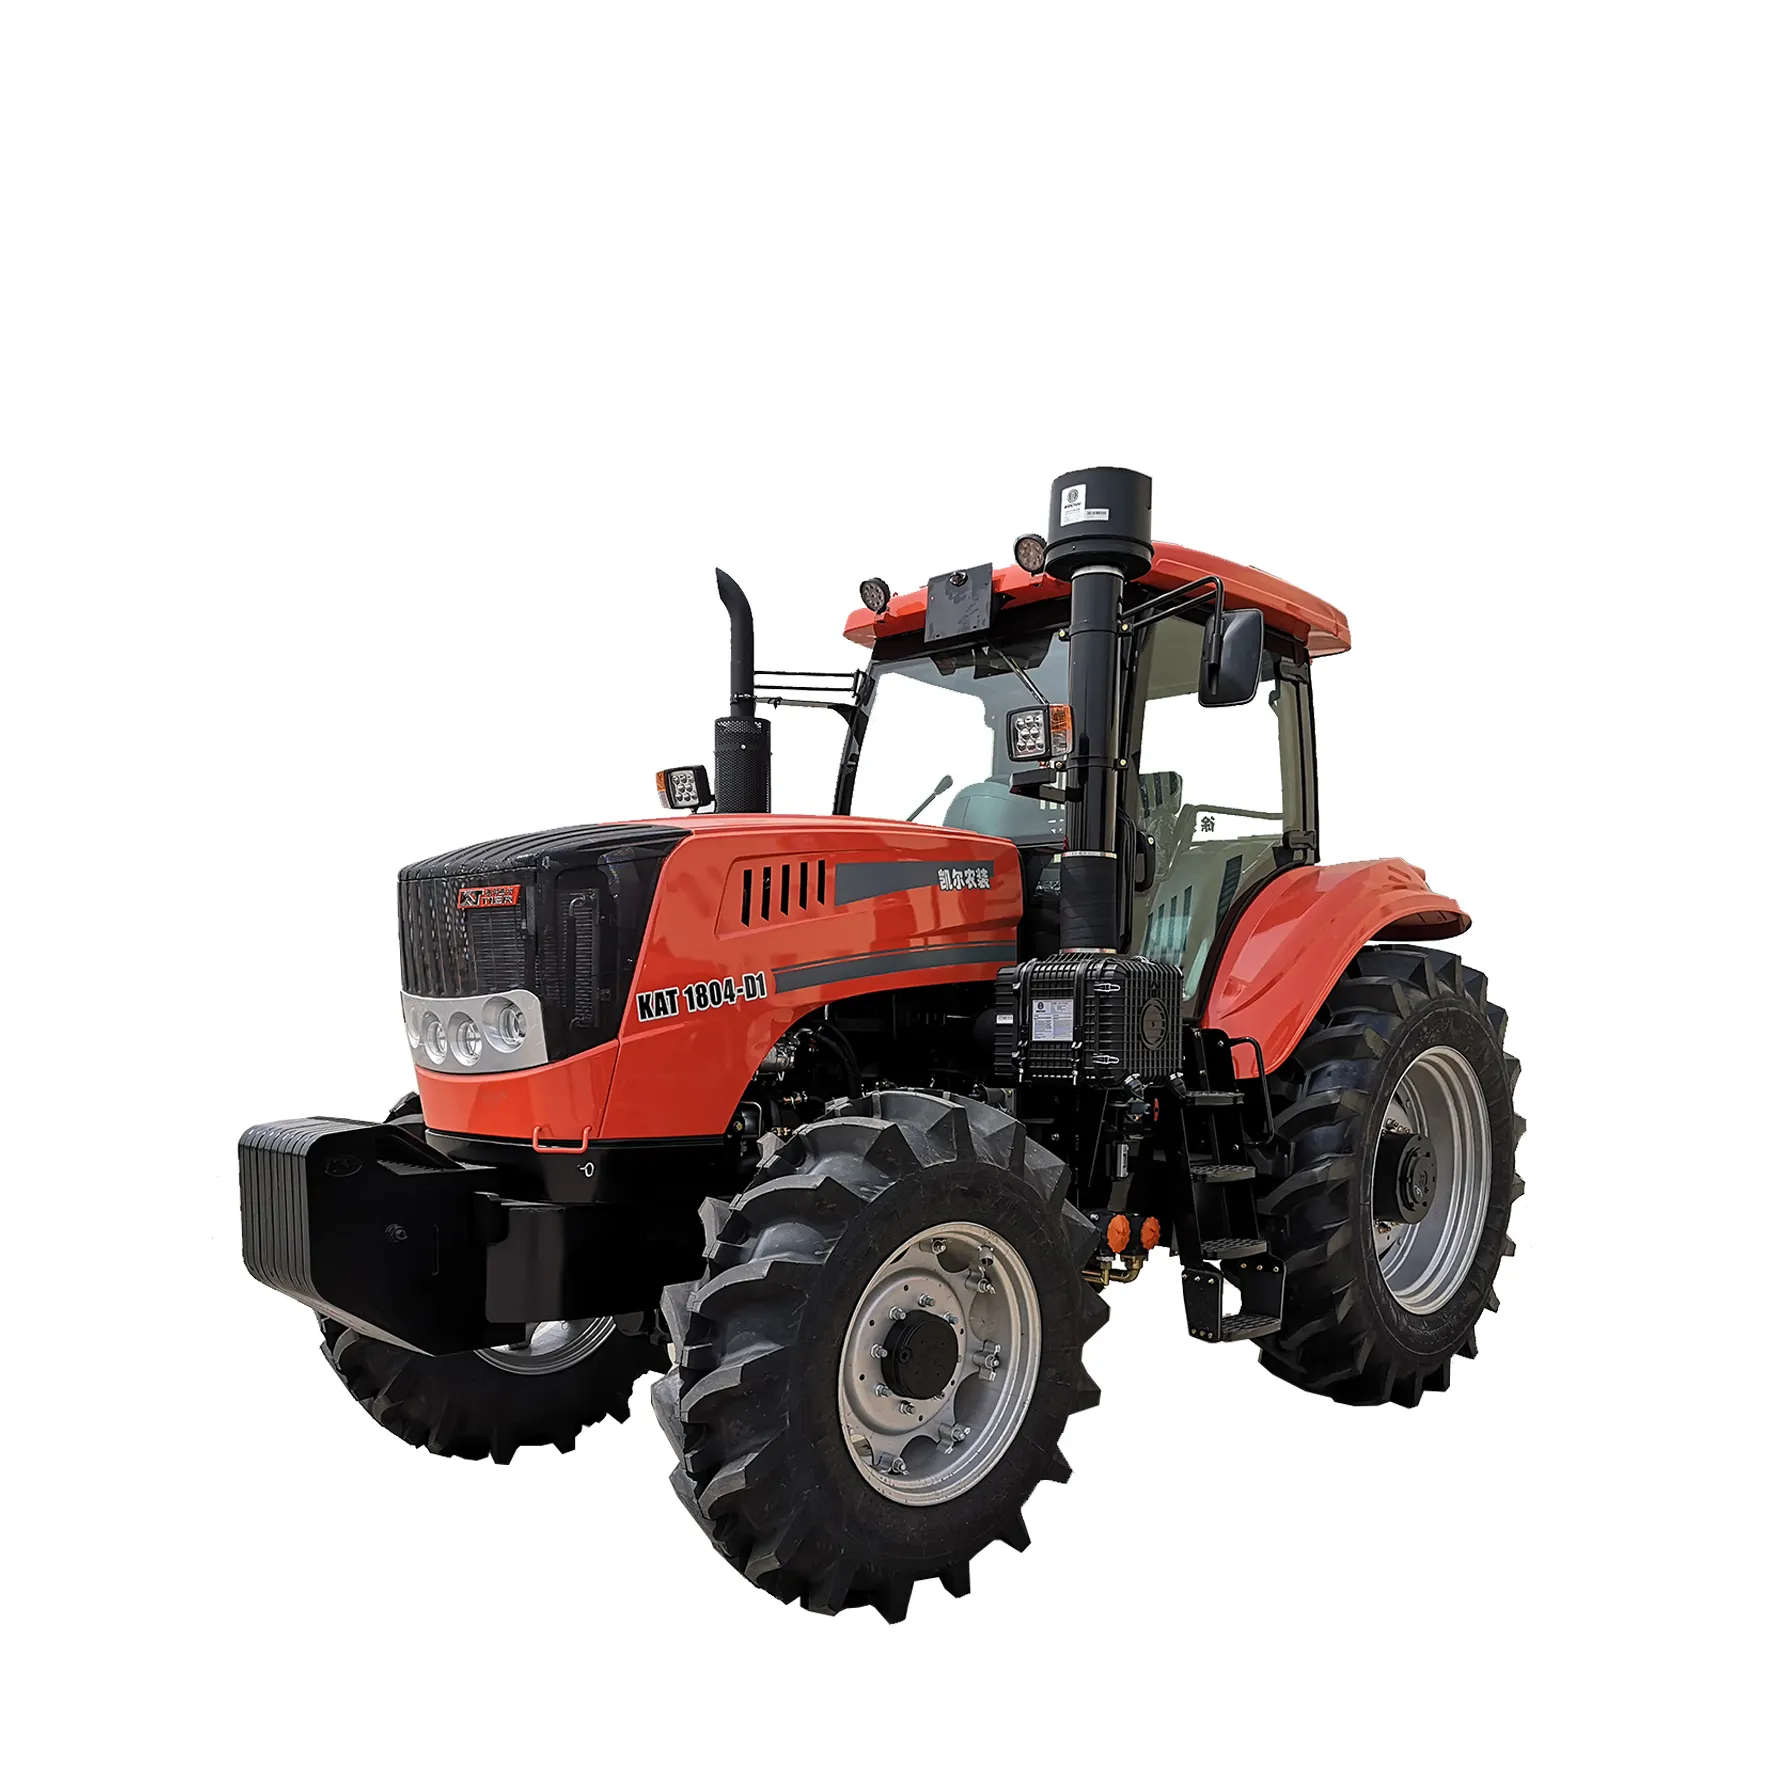 Big Promotion Farming Tractor 180HP Attachments Tractors for Agriculture Use Cheap Machine for Sale